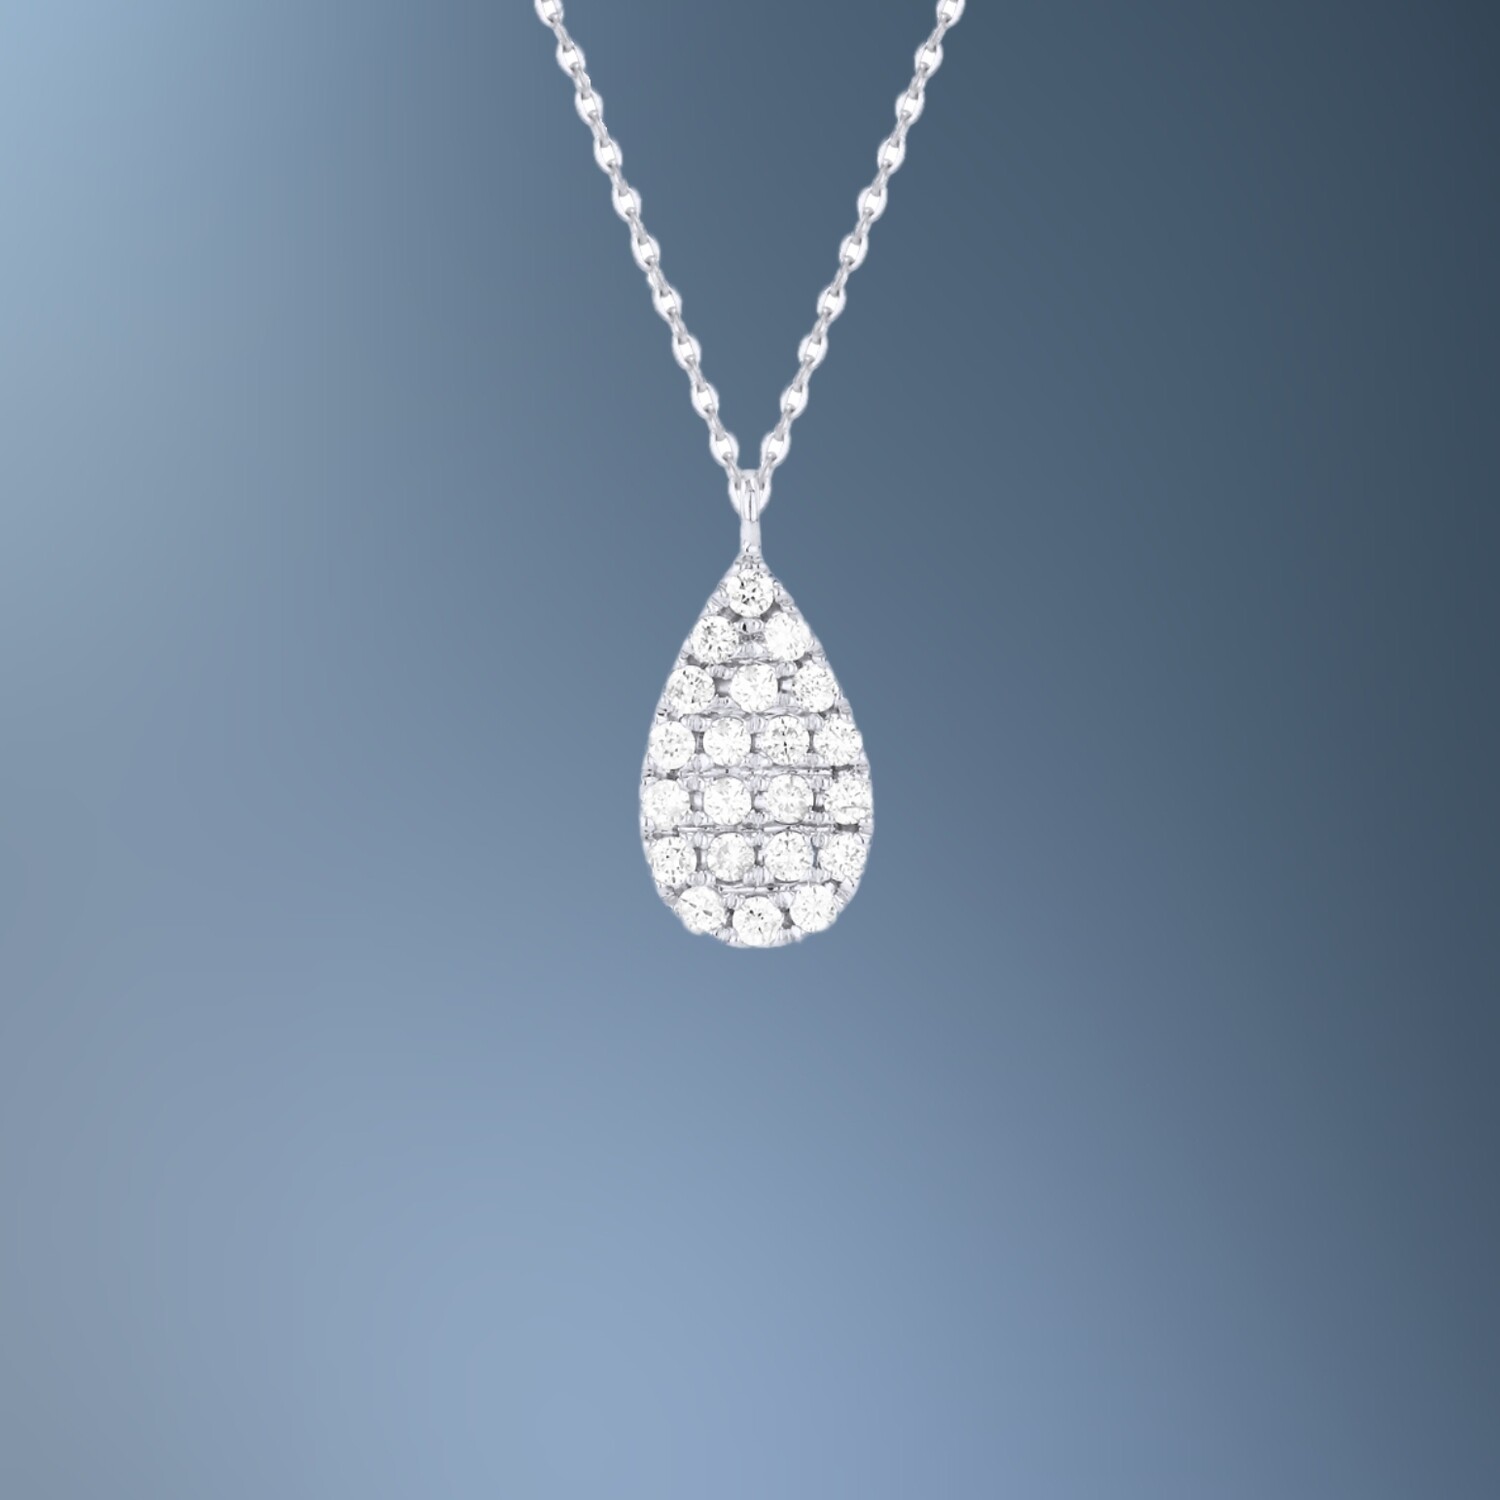 14KT WHITE GOLD PEAR SHAPE DIAMOND PENDANT FEATURING 21 ROUND BRILLIANT CUT DIAMONDS TOTALING 0.14 CTS